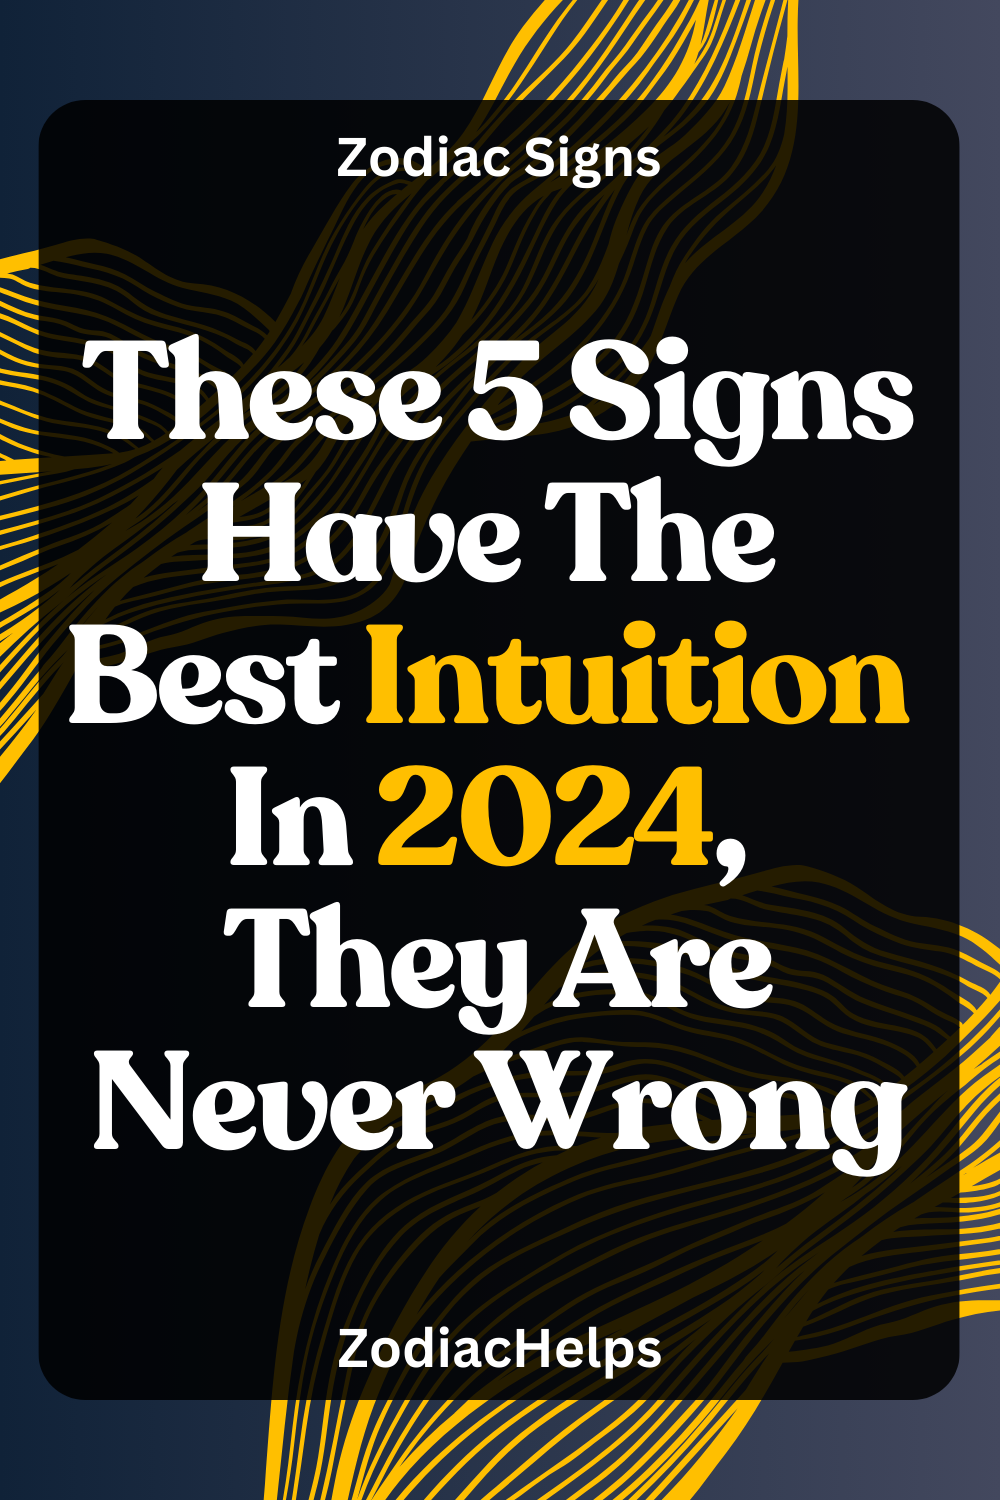 These 5 Signs Have The Best Intuition In 2024, They Are Never Wrong